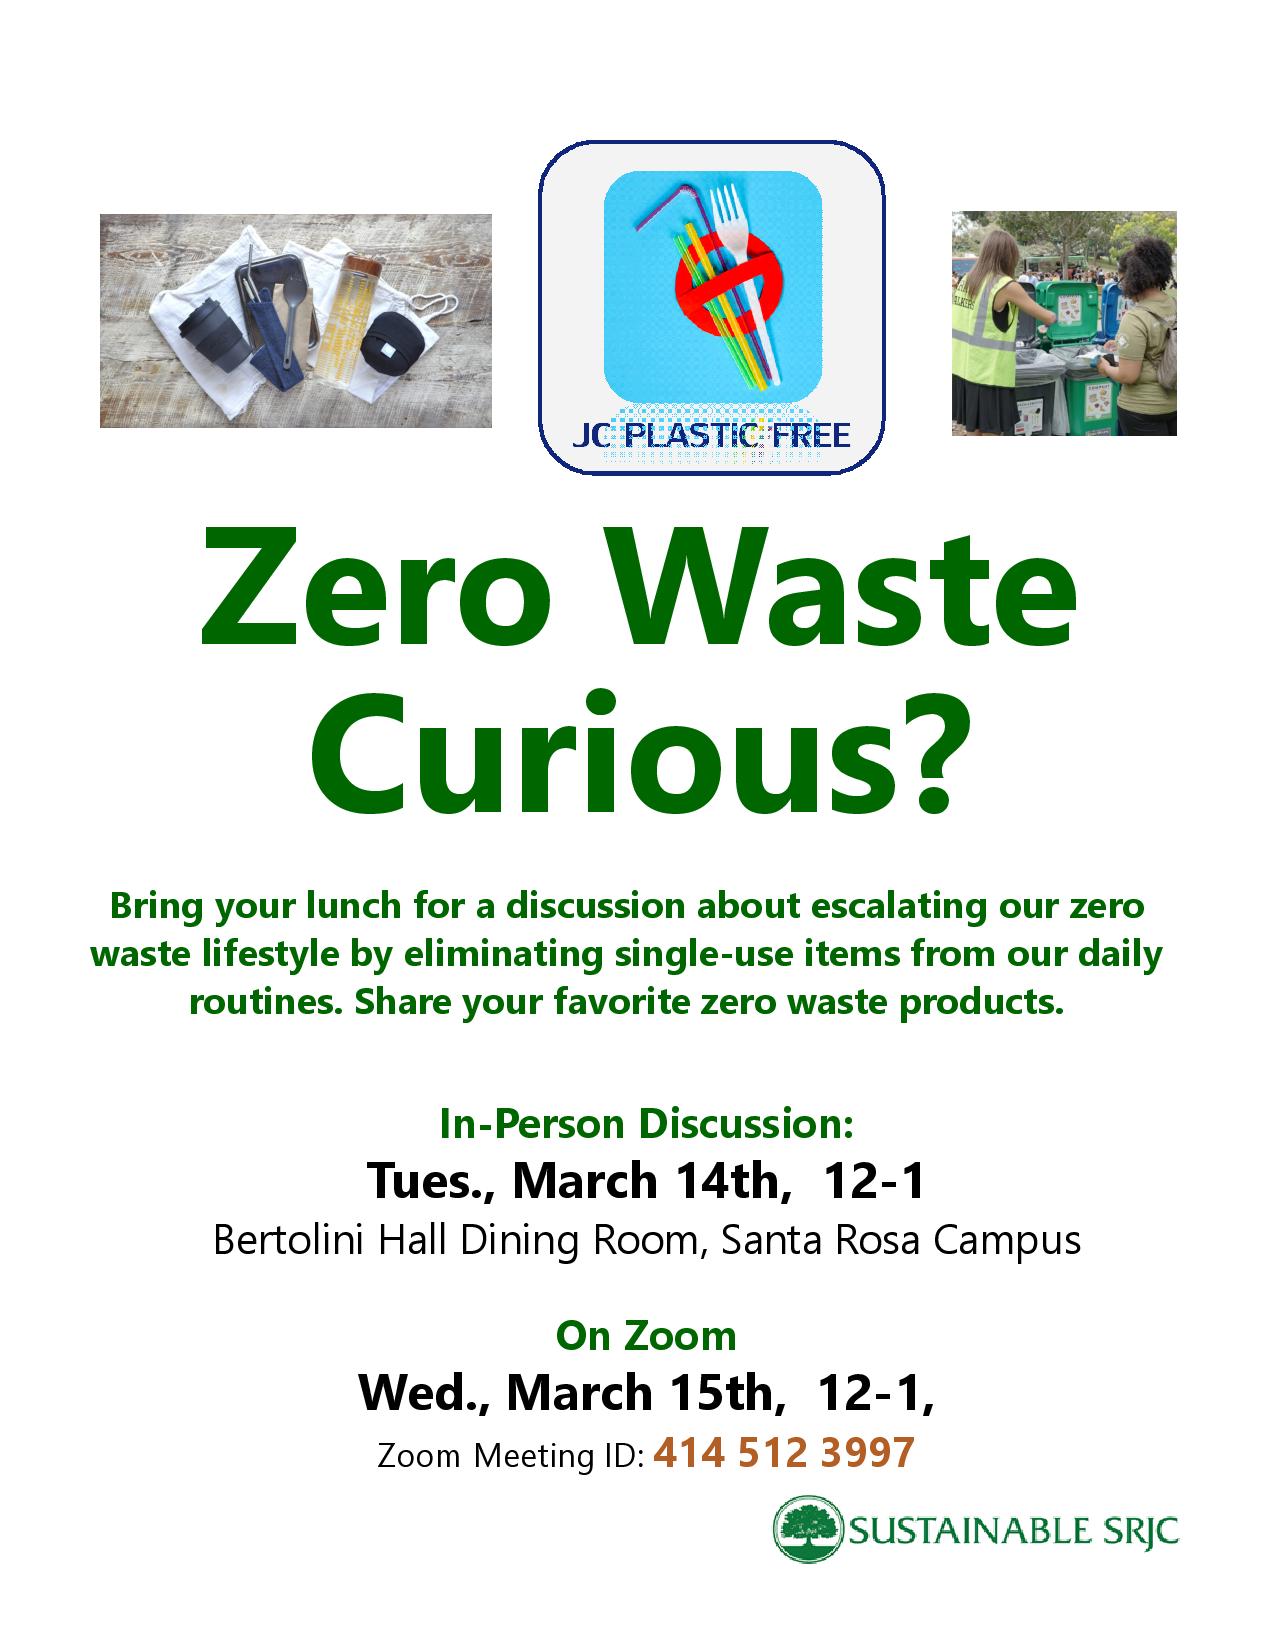 Zero Waste Curious? Bring your lunch for a discussion about escalating our zero waste lifestyle by eliminating single-use items from our daily routines. Share your favorite zero waste products. In-Person Discussion: Tues., March 14th, 12-1 Bertolini Hall Dining Room, Santa Rosa Campus On Zoom Wed., March 15th, 12-1, Zoom Meeting ID: 414 512 3997